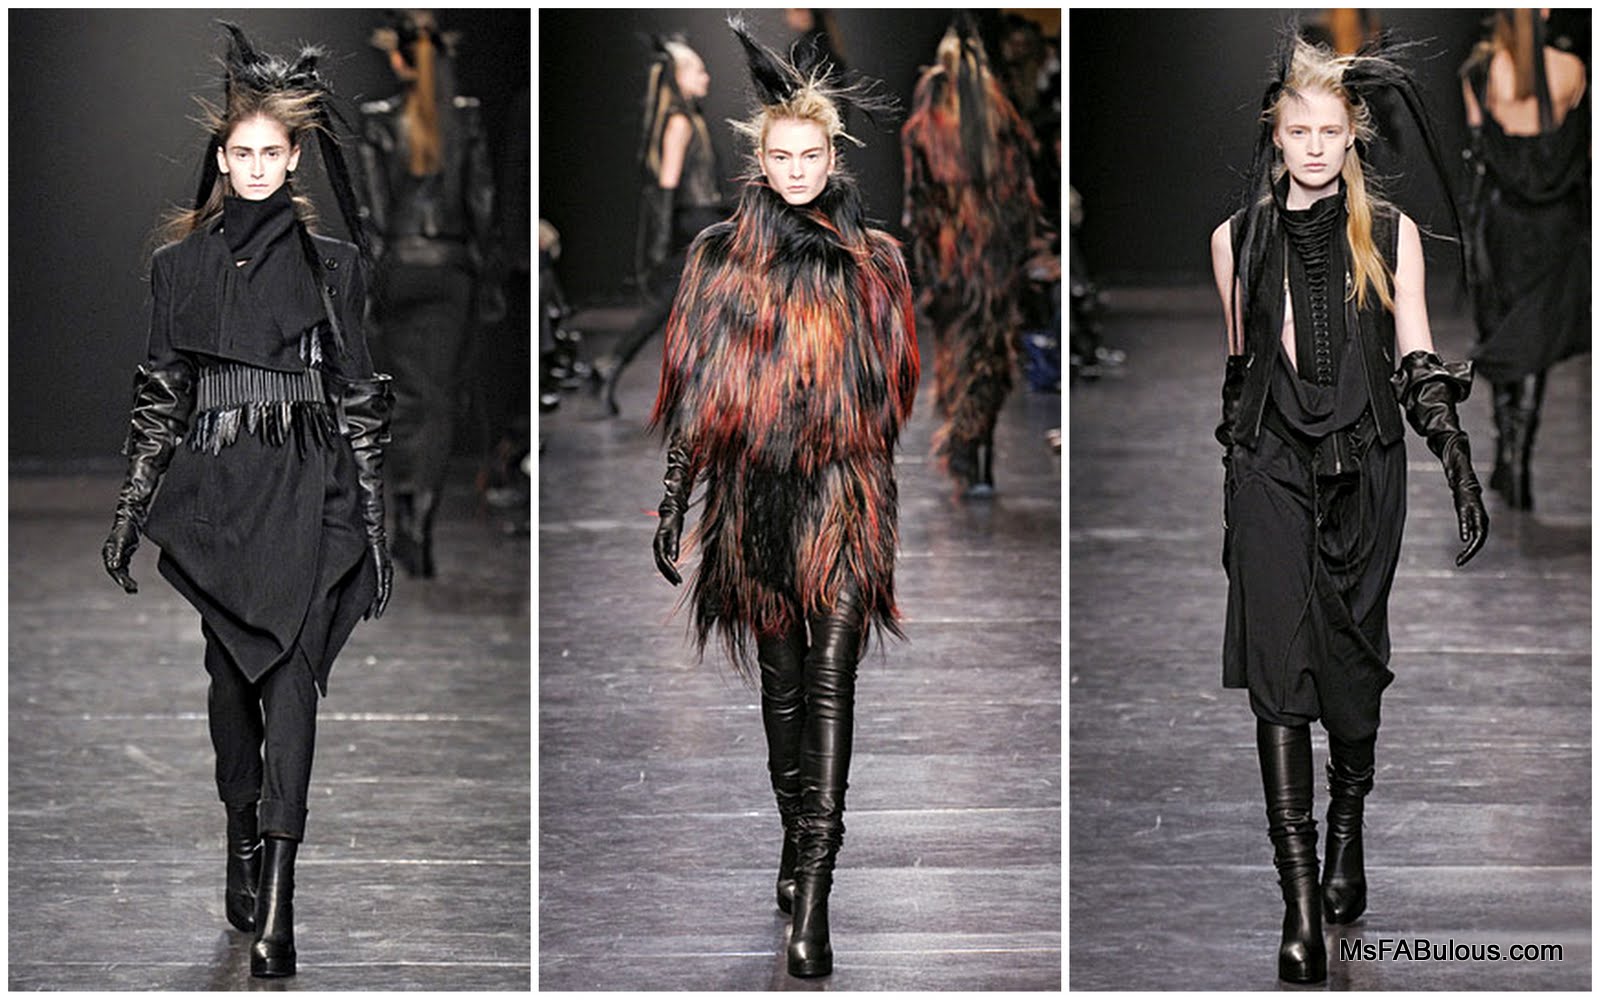 MS. FABULOUS: Ann Demeulemeester Fall 2011 fashion design, indie ...